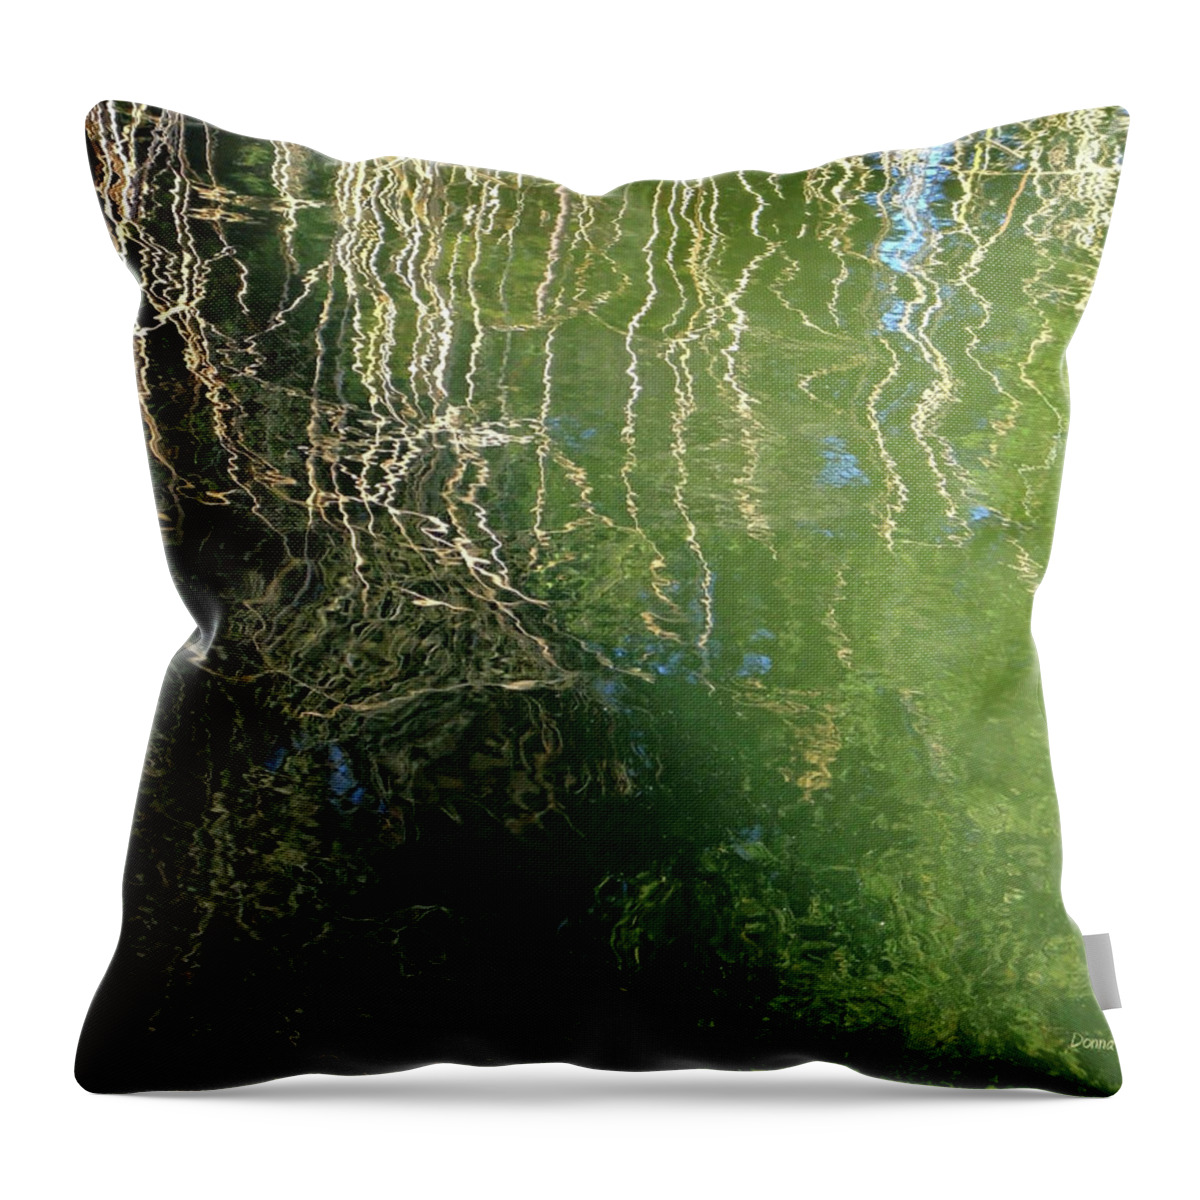 Water Throw Pillow featuring the photograph Yawning Depth by Donna Blackhall